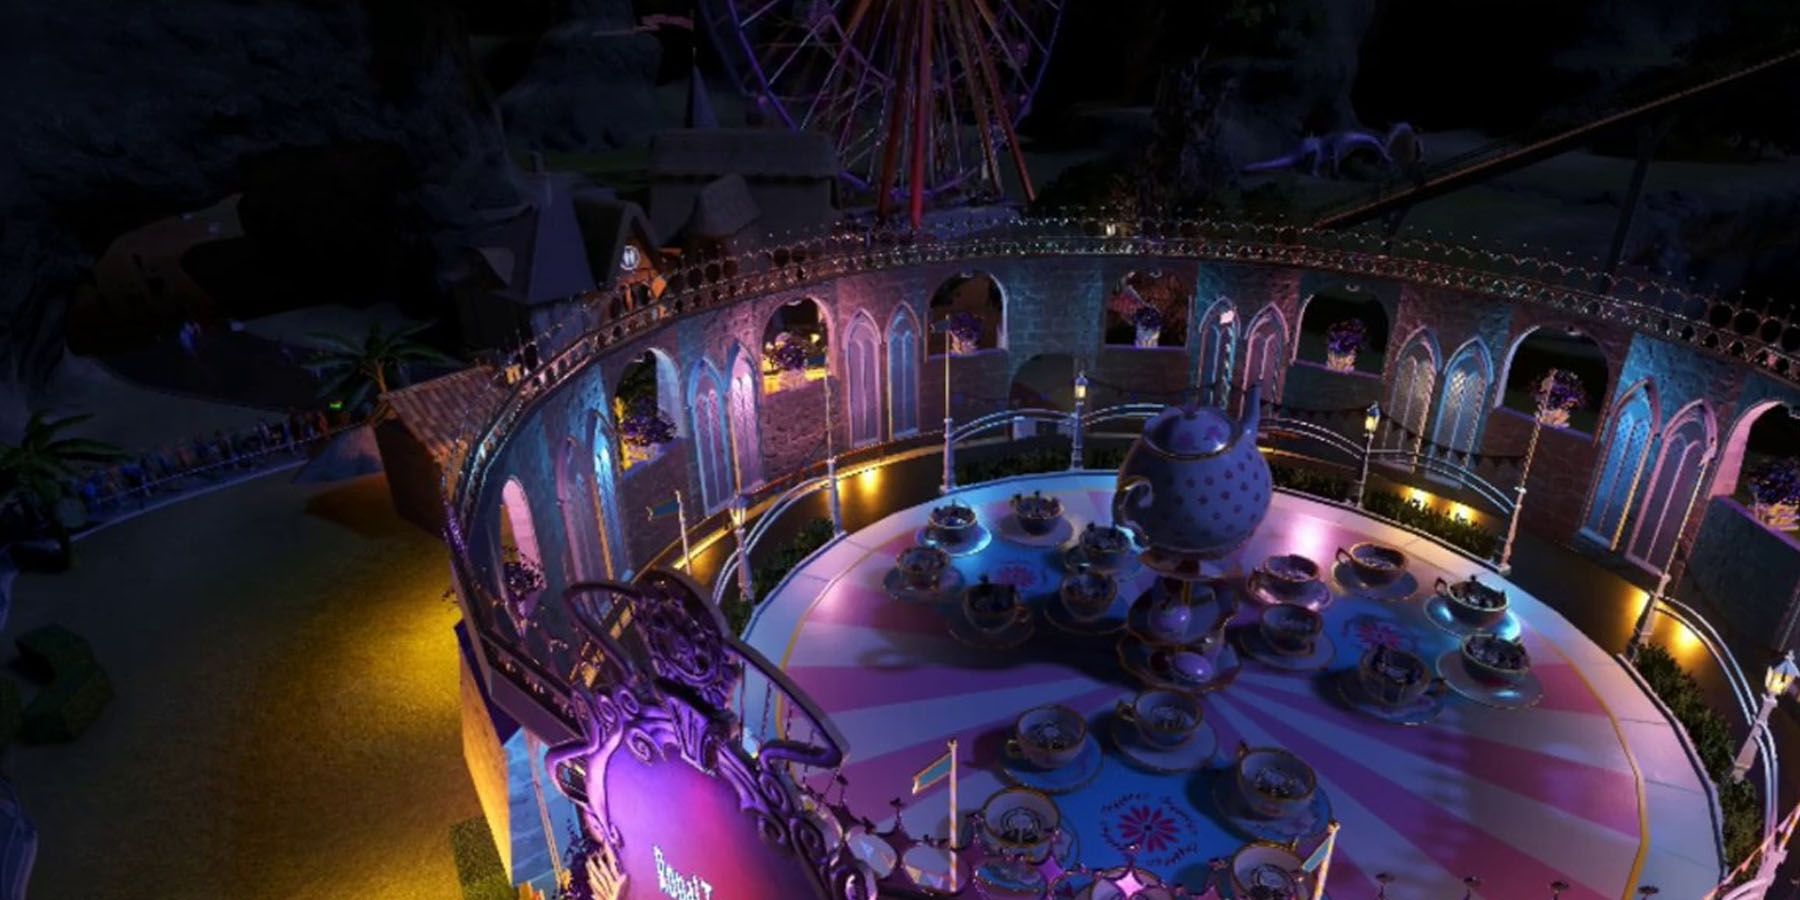 The Teacups in Planet Coaster